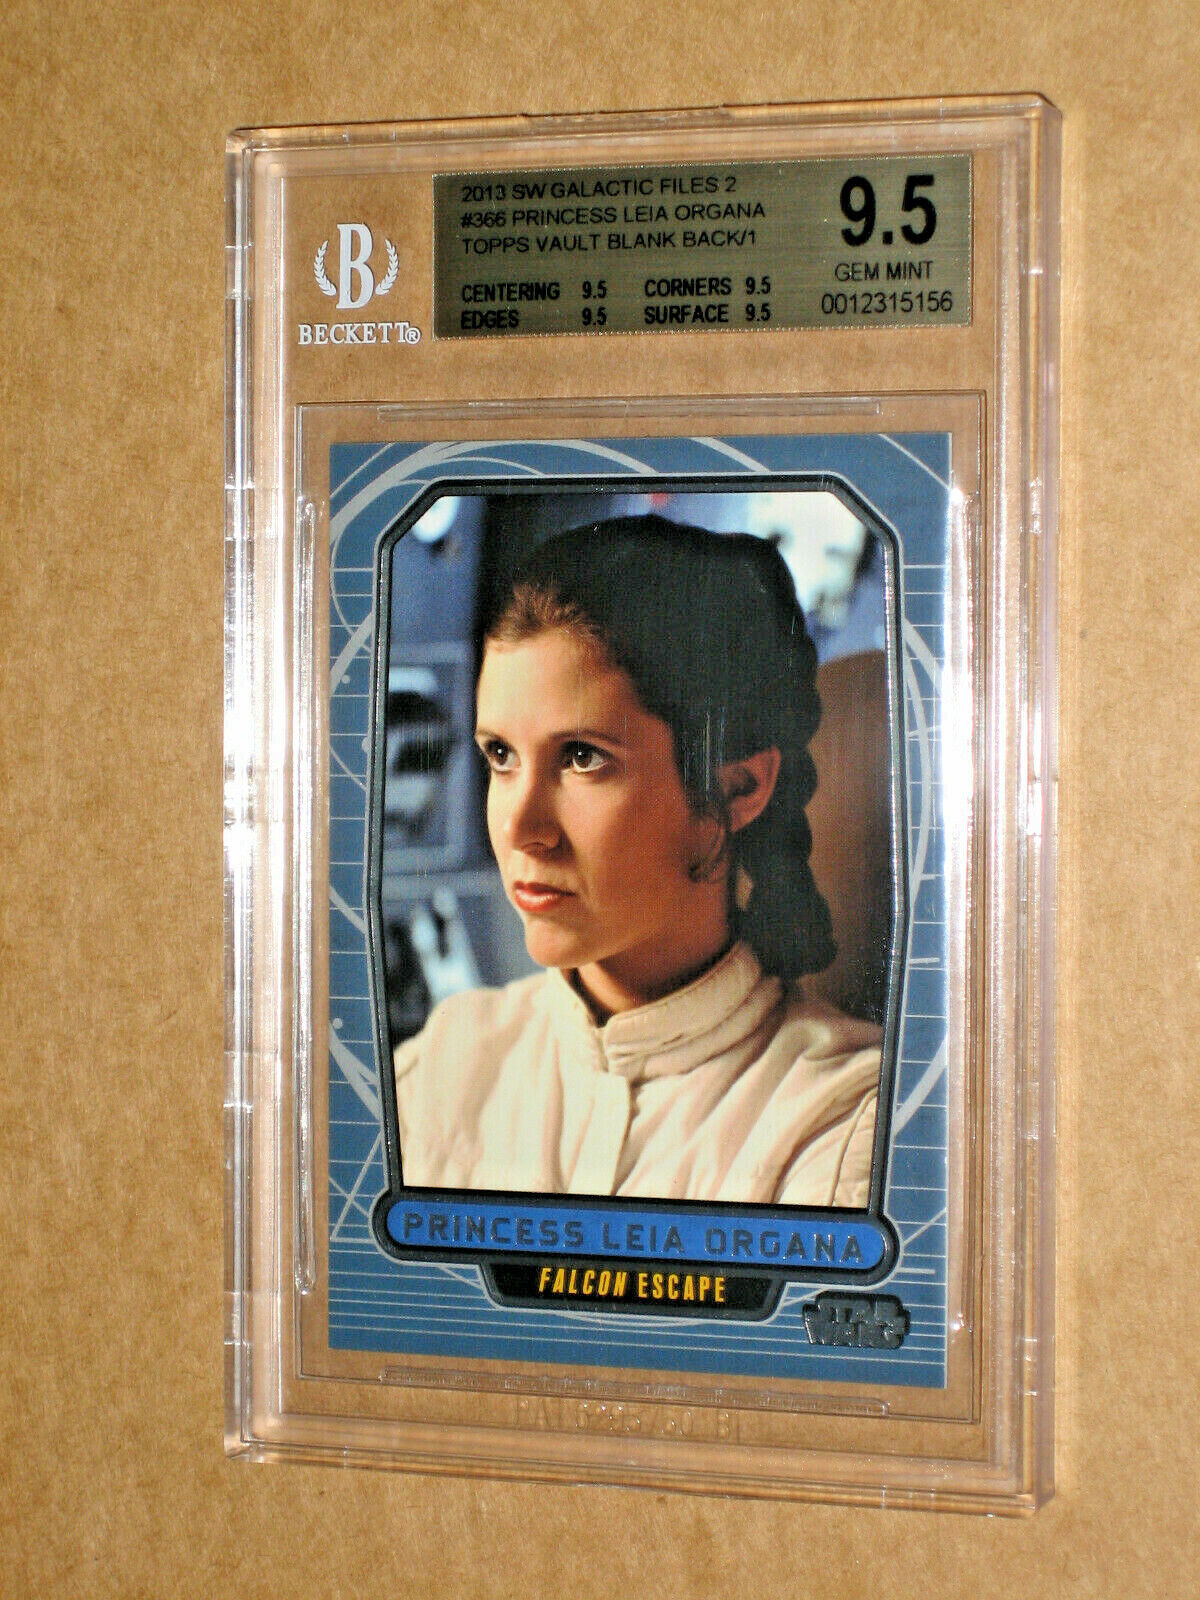 BGS 9.5 CARRIE FISHER LEIA 2013 STAR WARS GALACTIC FILES 2 1/1 TOPPS VAULT MOVIE